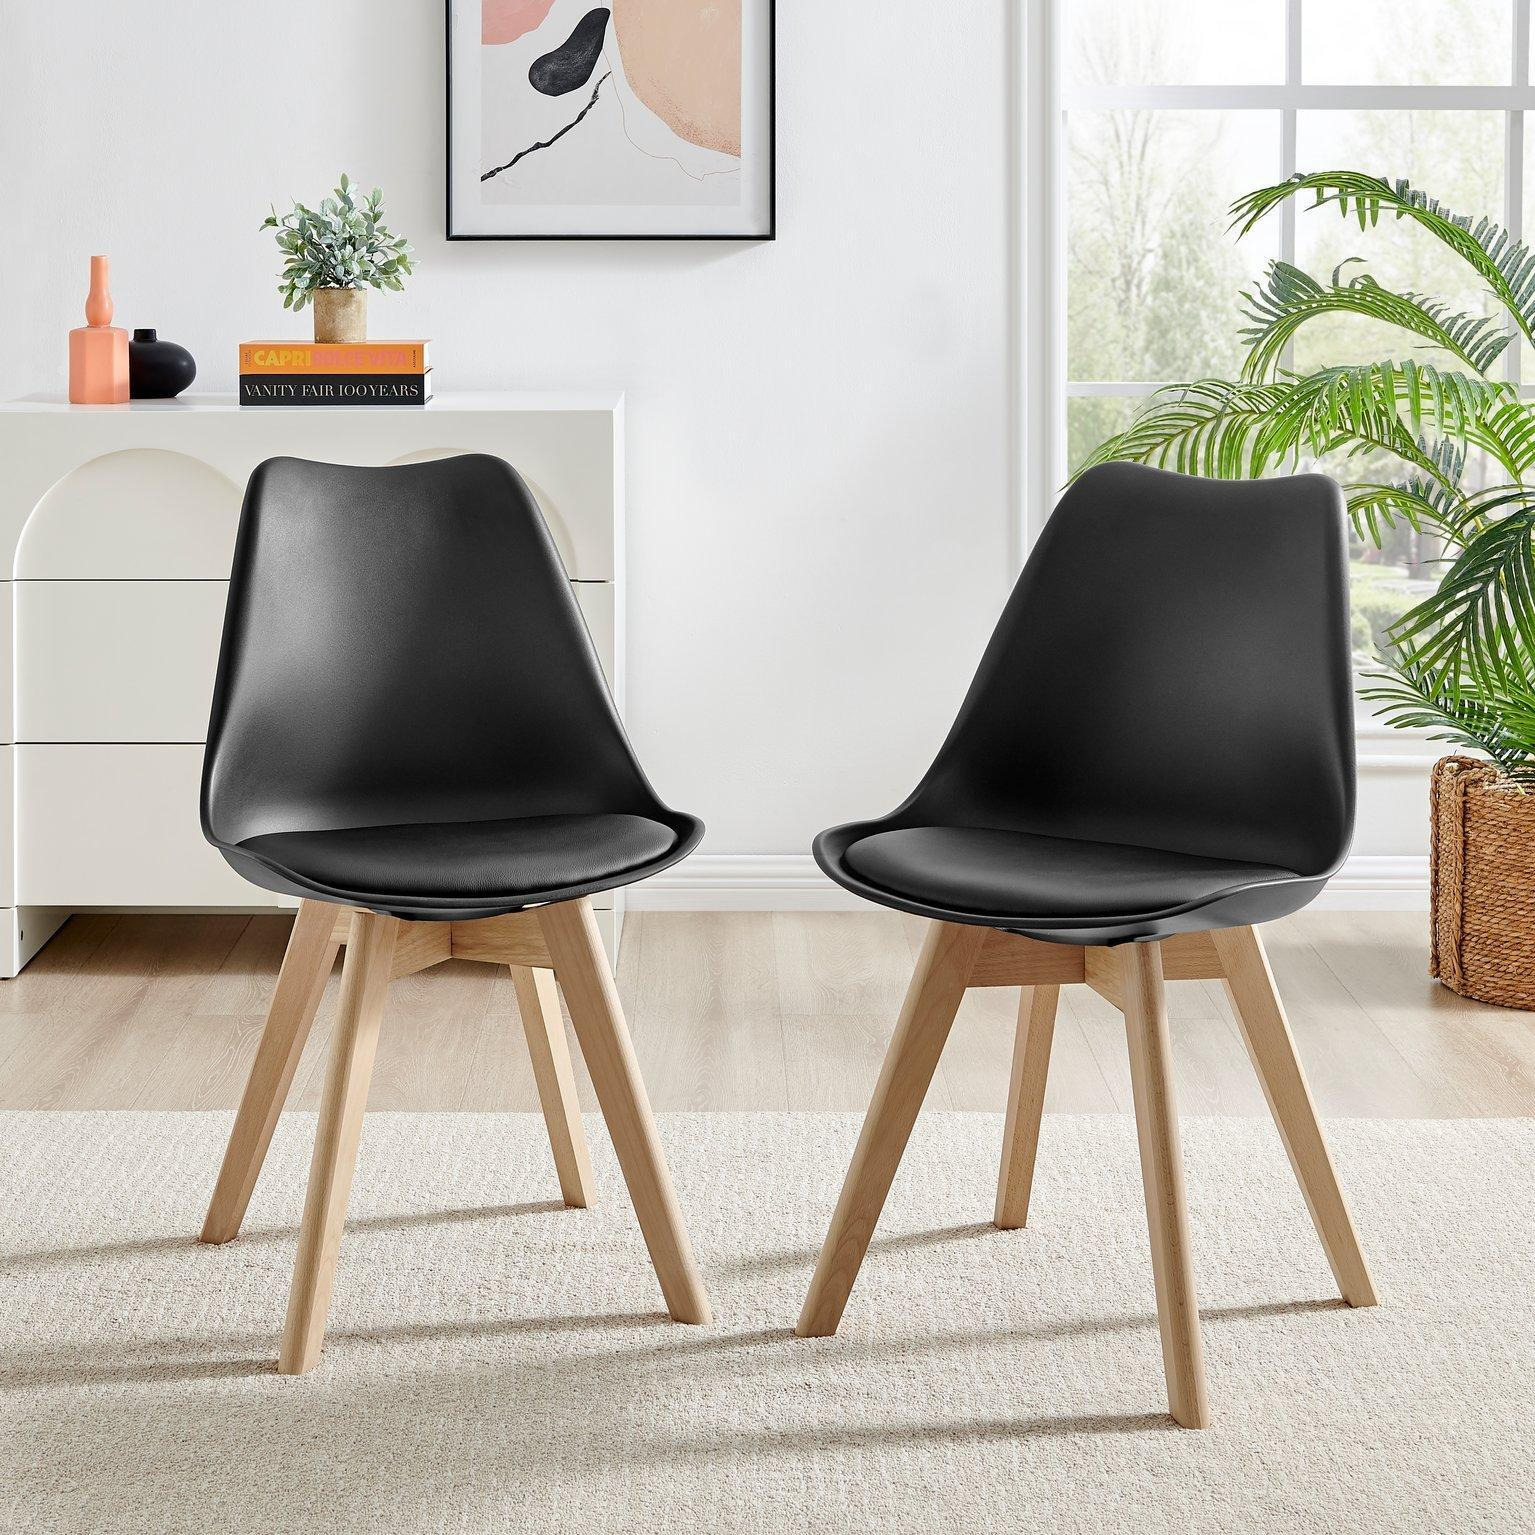 Set of 2 Stockholm Natural Birch Wood Scandi Minimalist Dining Chairs with Faux Leather Cushion - image 1